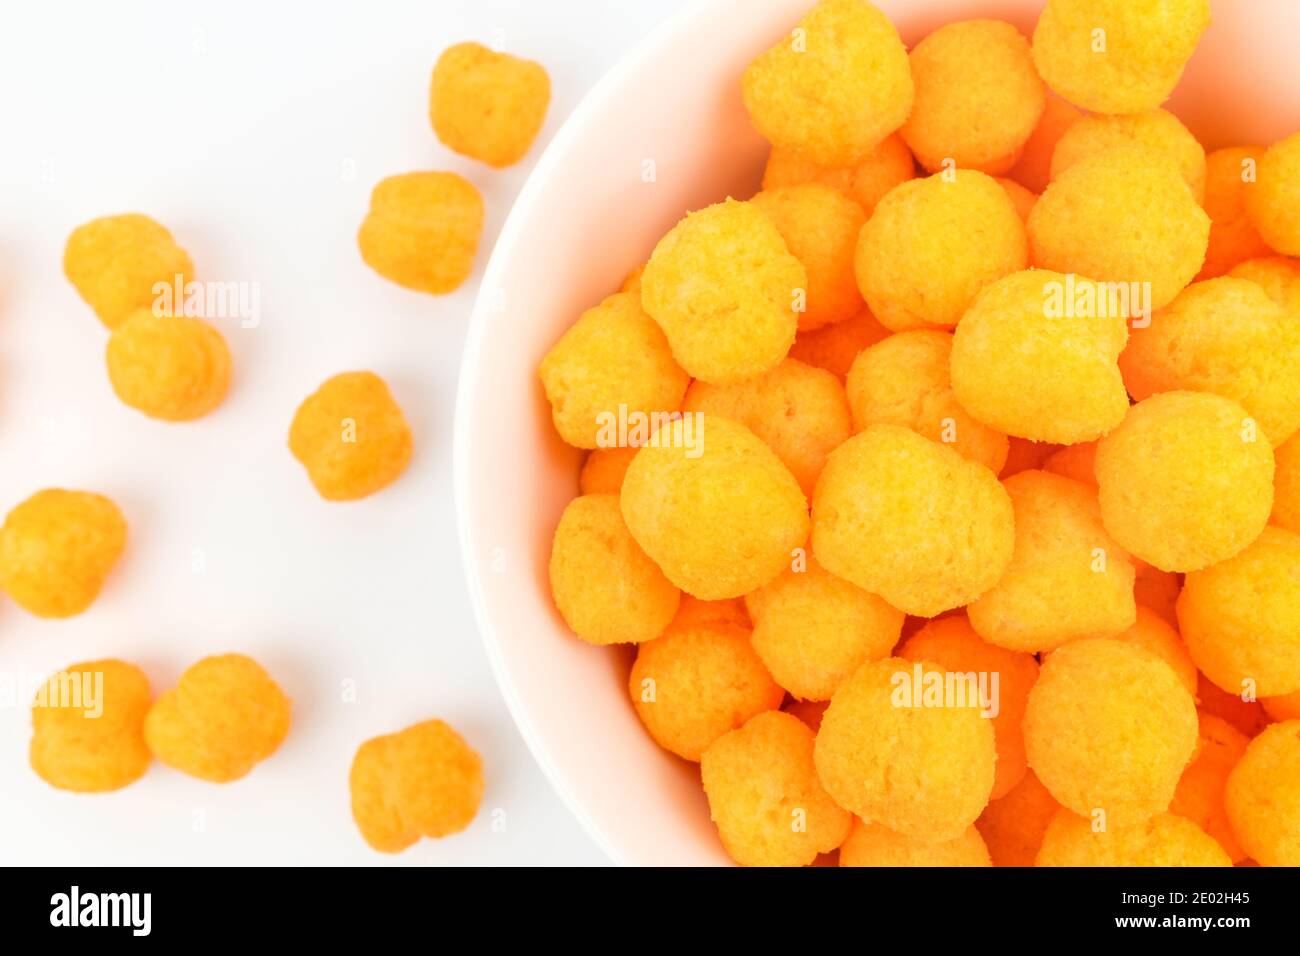 62+ Thousand Cheese Balls Royalty-Free Images, Stock Photos